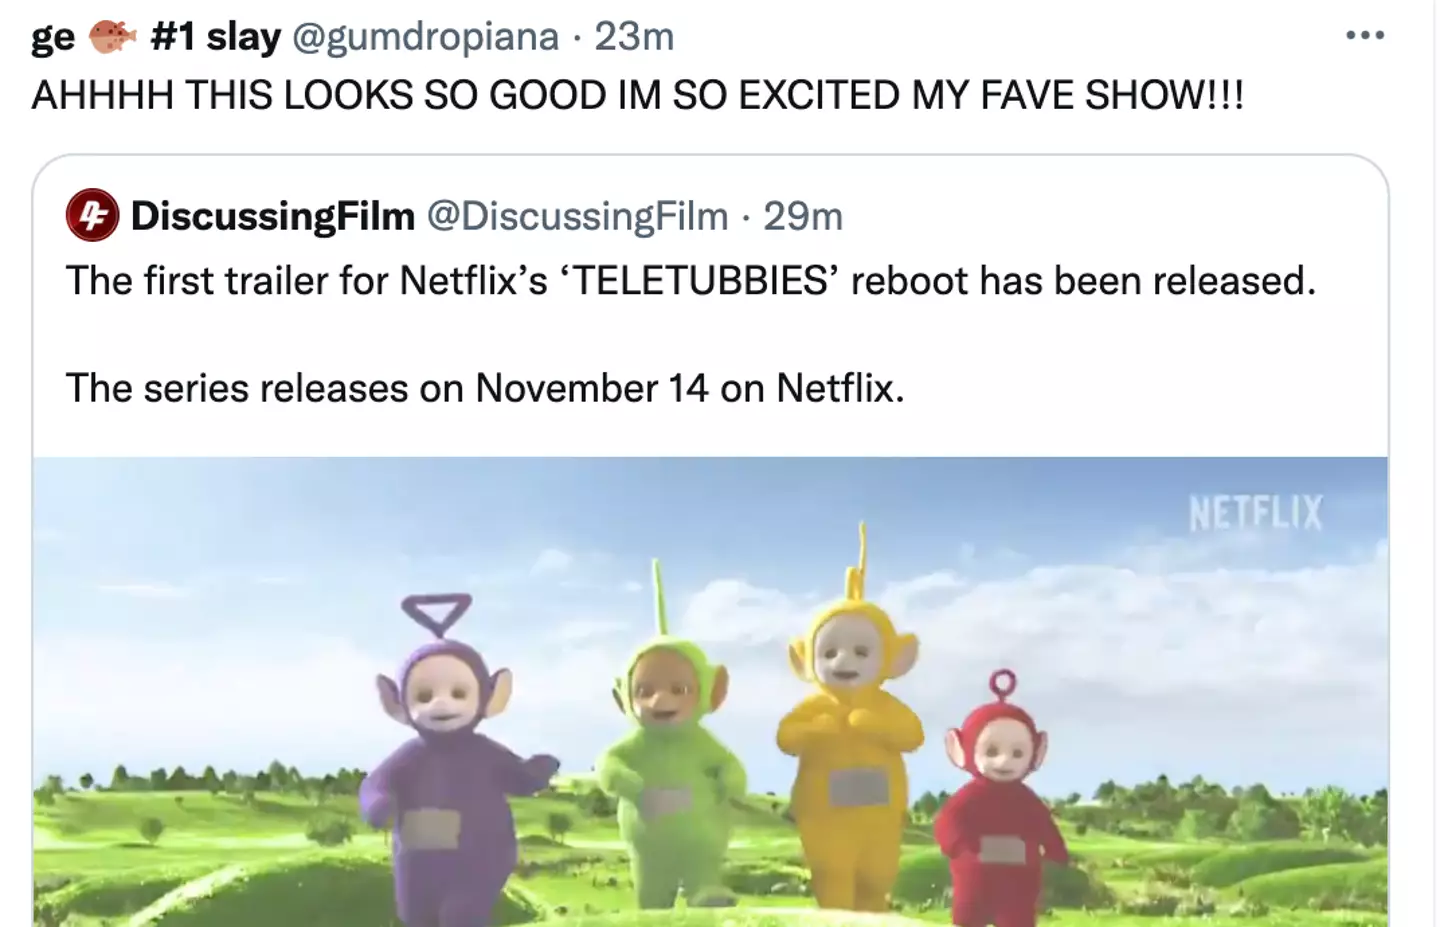 Some Netflix users can't wait for the new series.